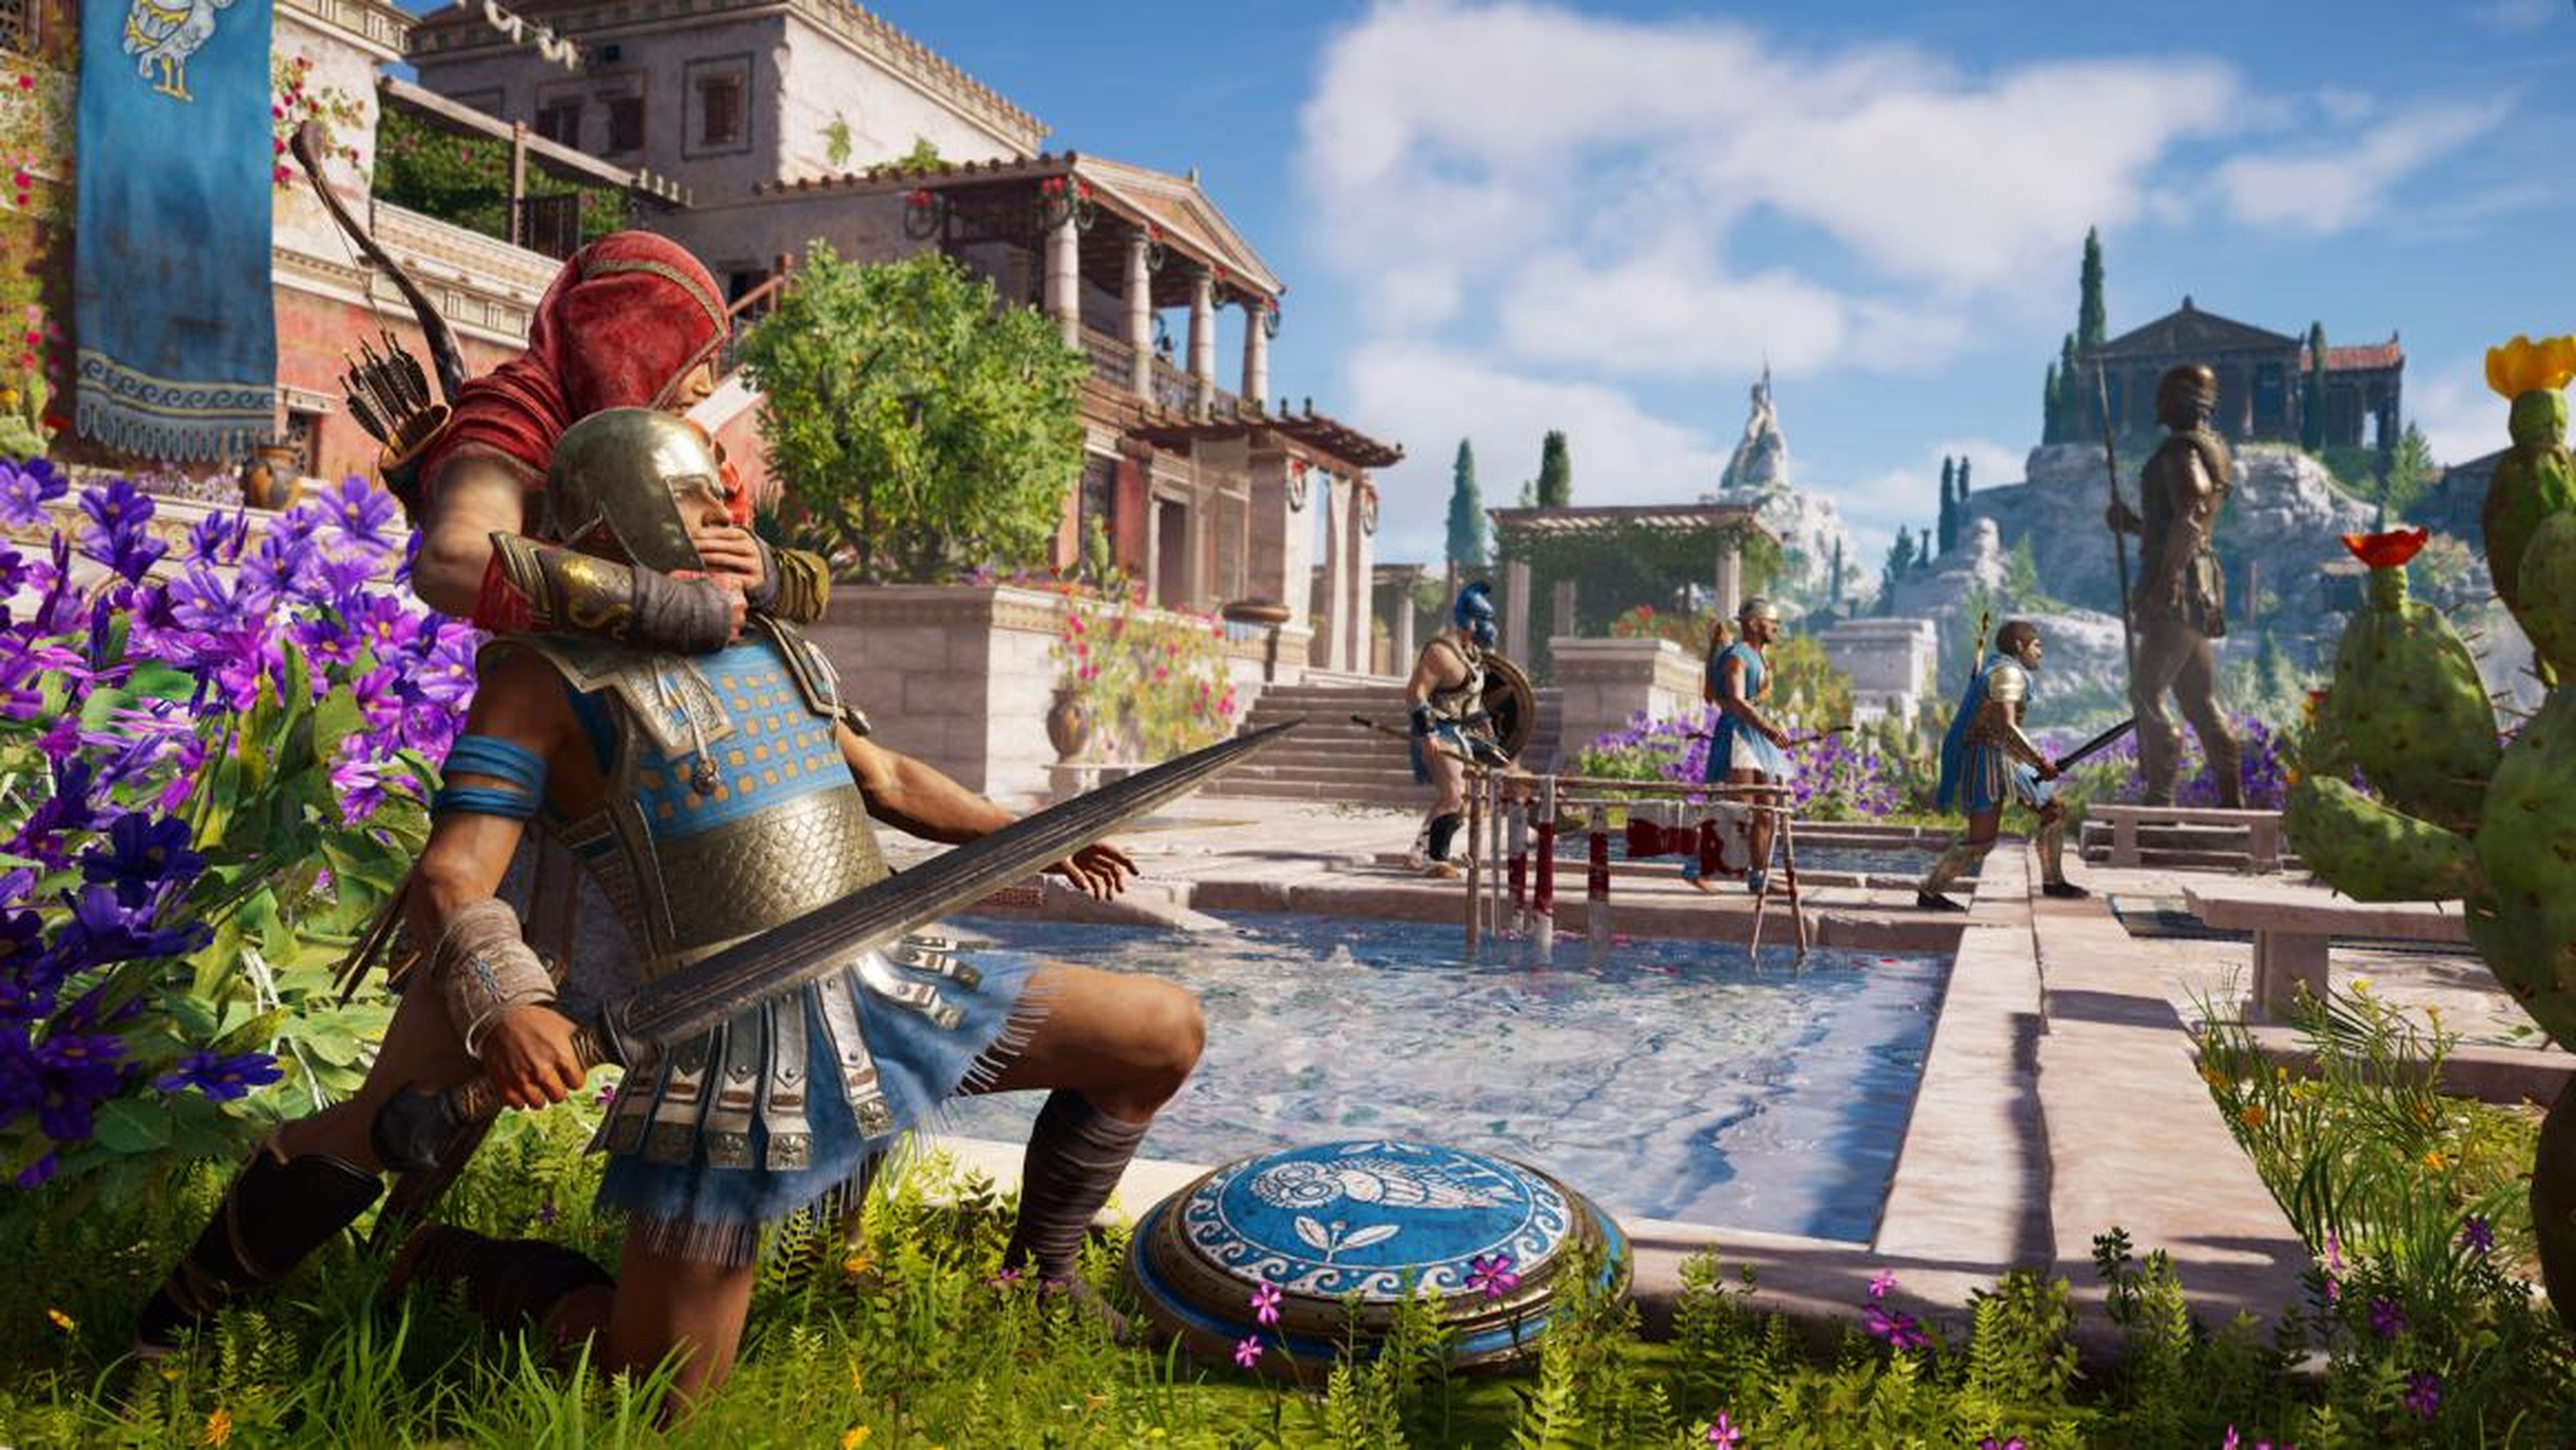 Video games like "Assassin's Creed: Odyssey" usually require expensive consoles, but that could change soon.